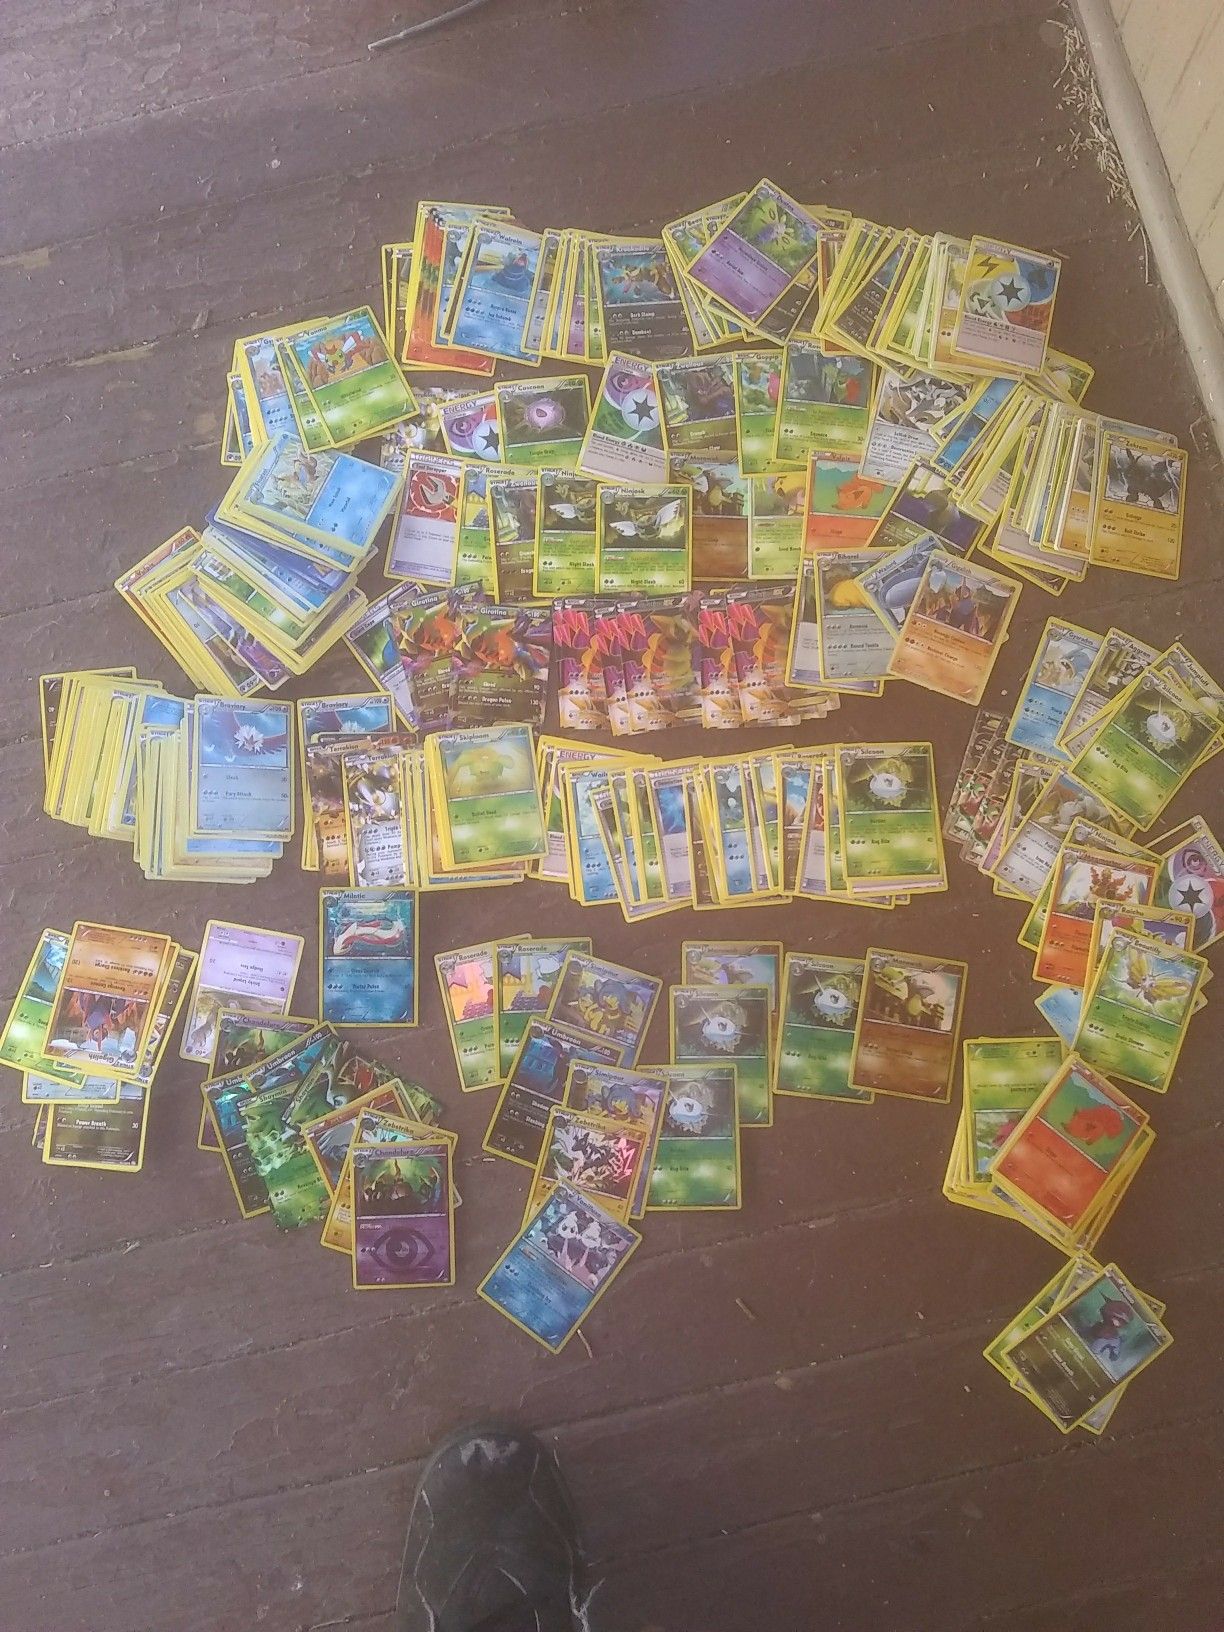 Large Pokemon collection